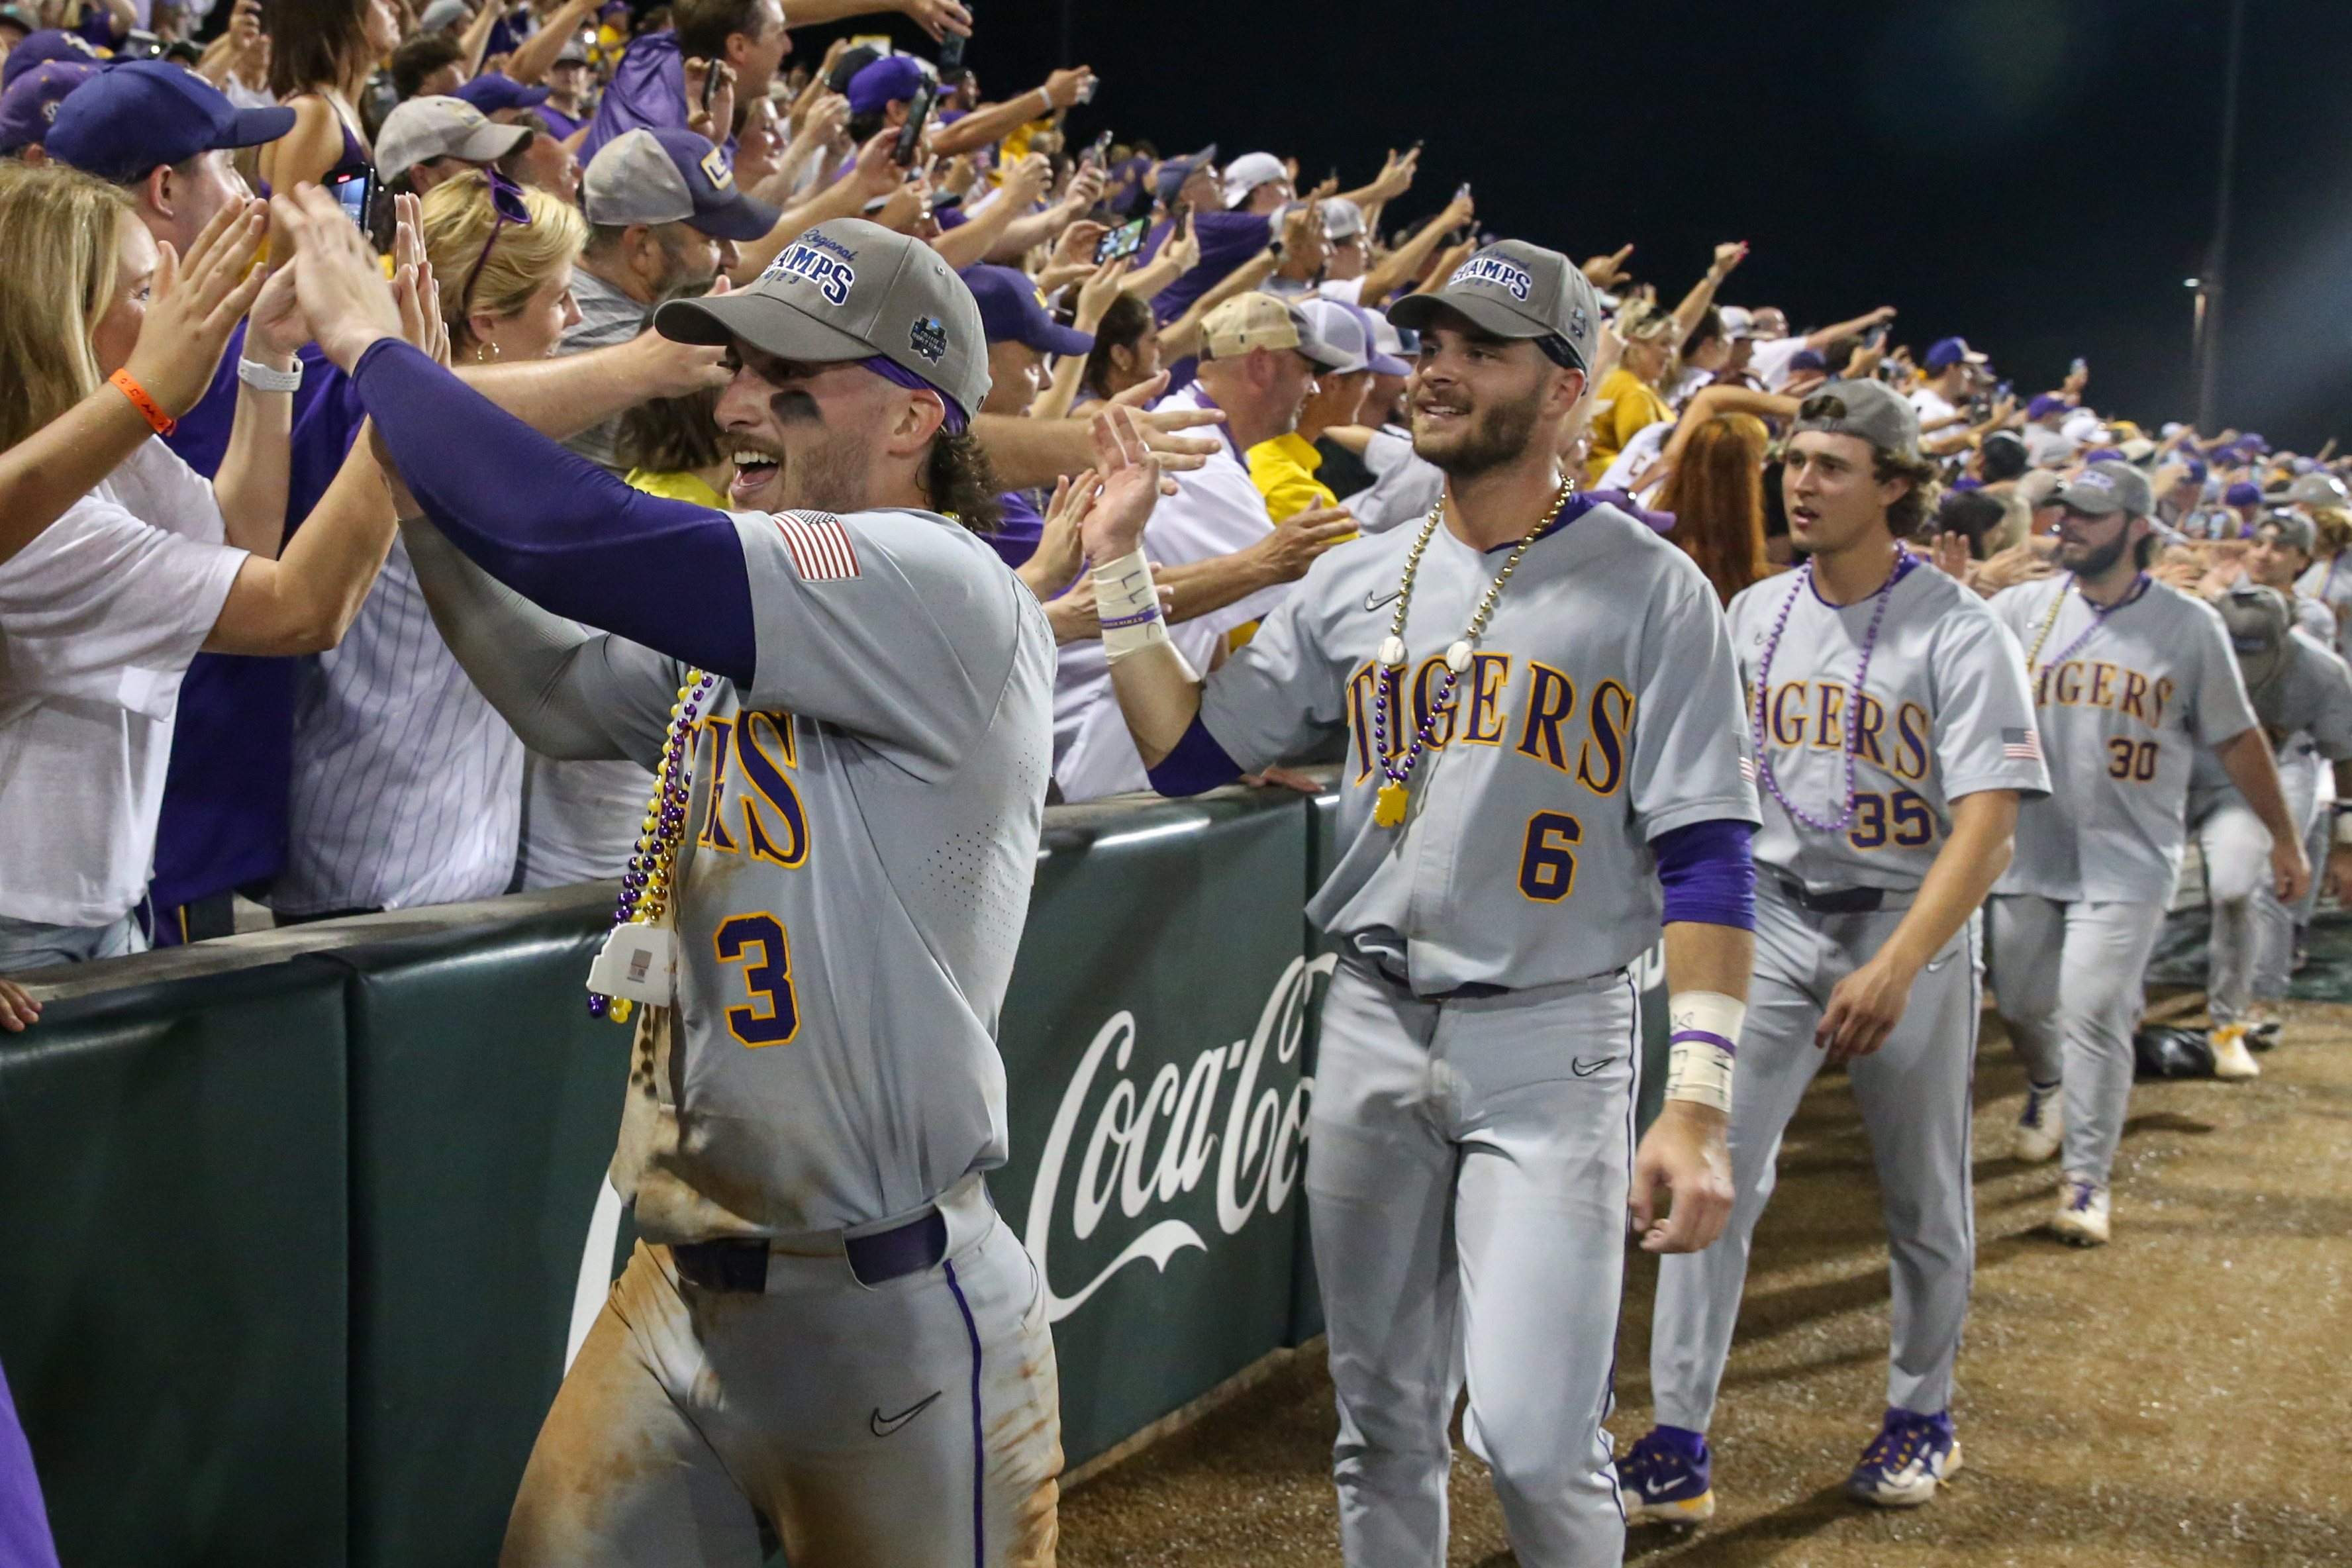 Fans encouraged to gather Wednesday and send LSU baseball team to